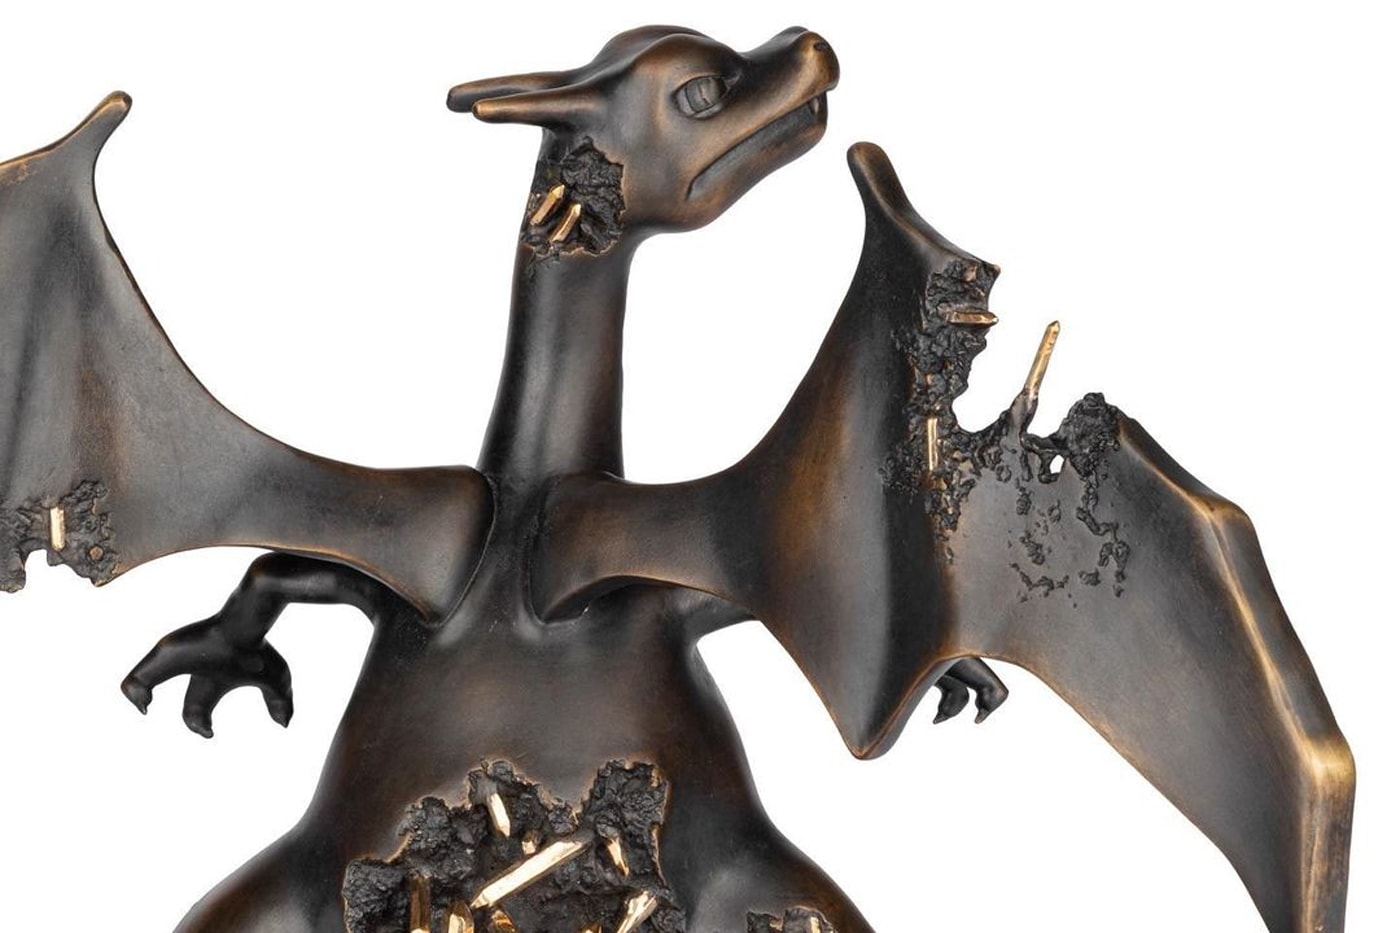 Daniel Arsham bronze crystalized charizard sculpture relic of kanto cast bronze black oil patina crystals edition of 99 art handling gloves hand signed numbered release info date price